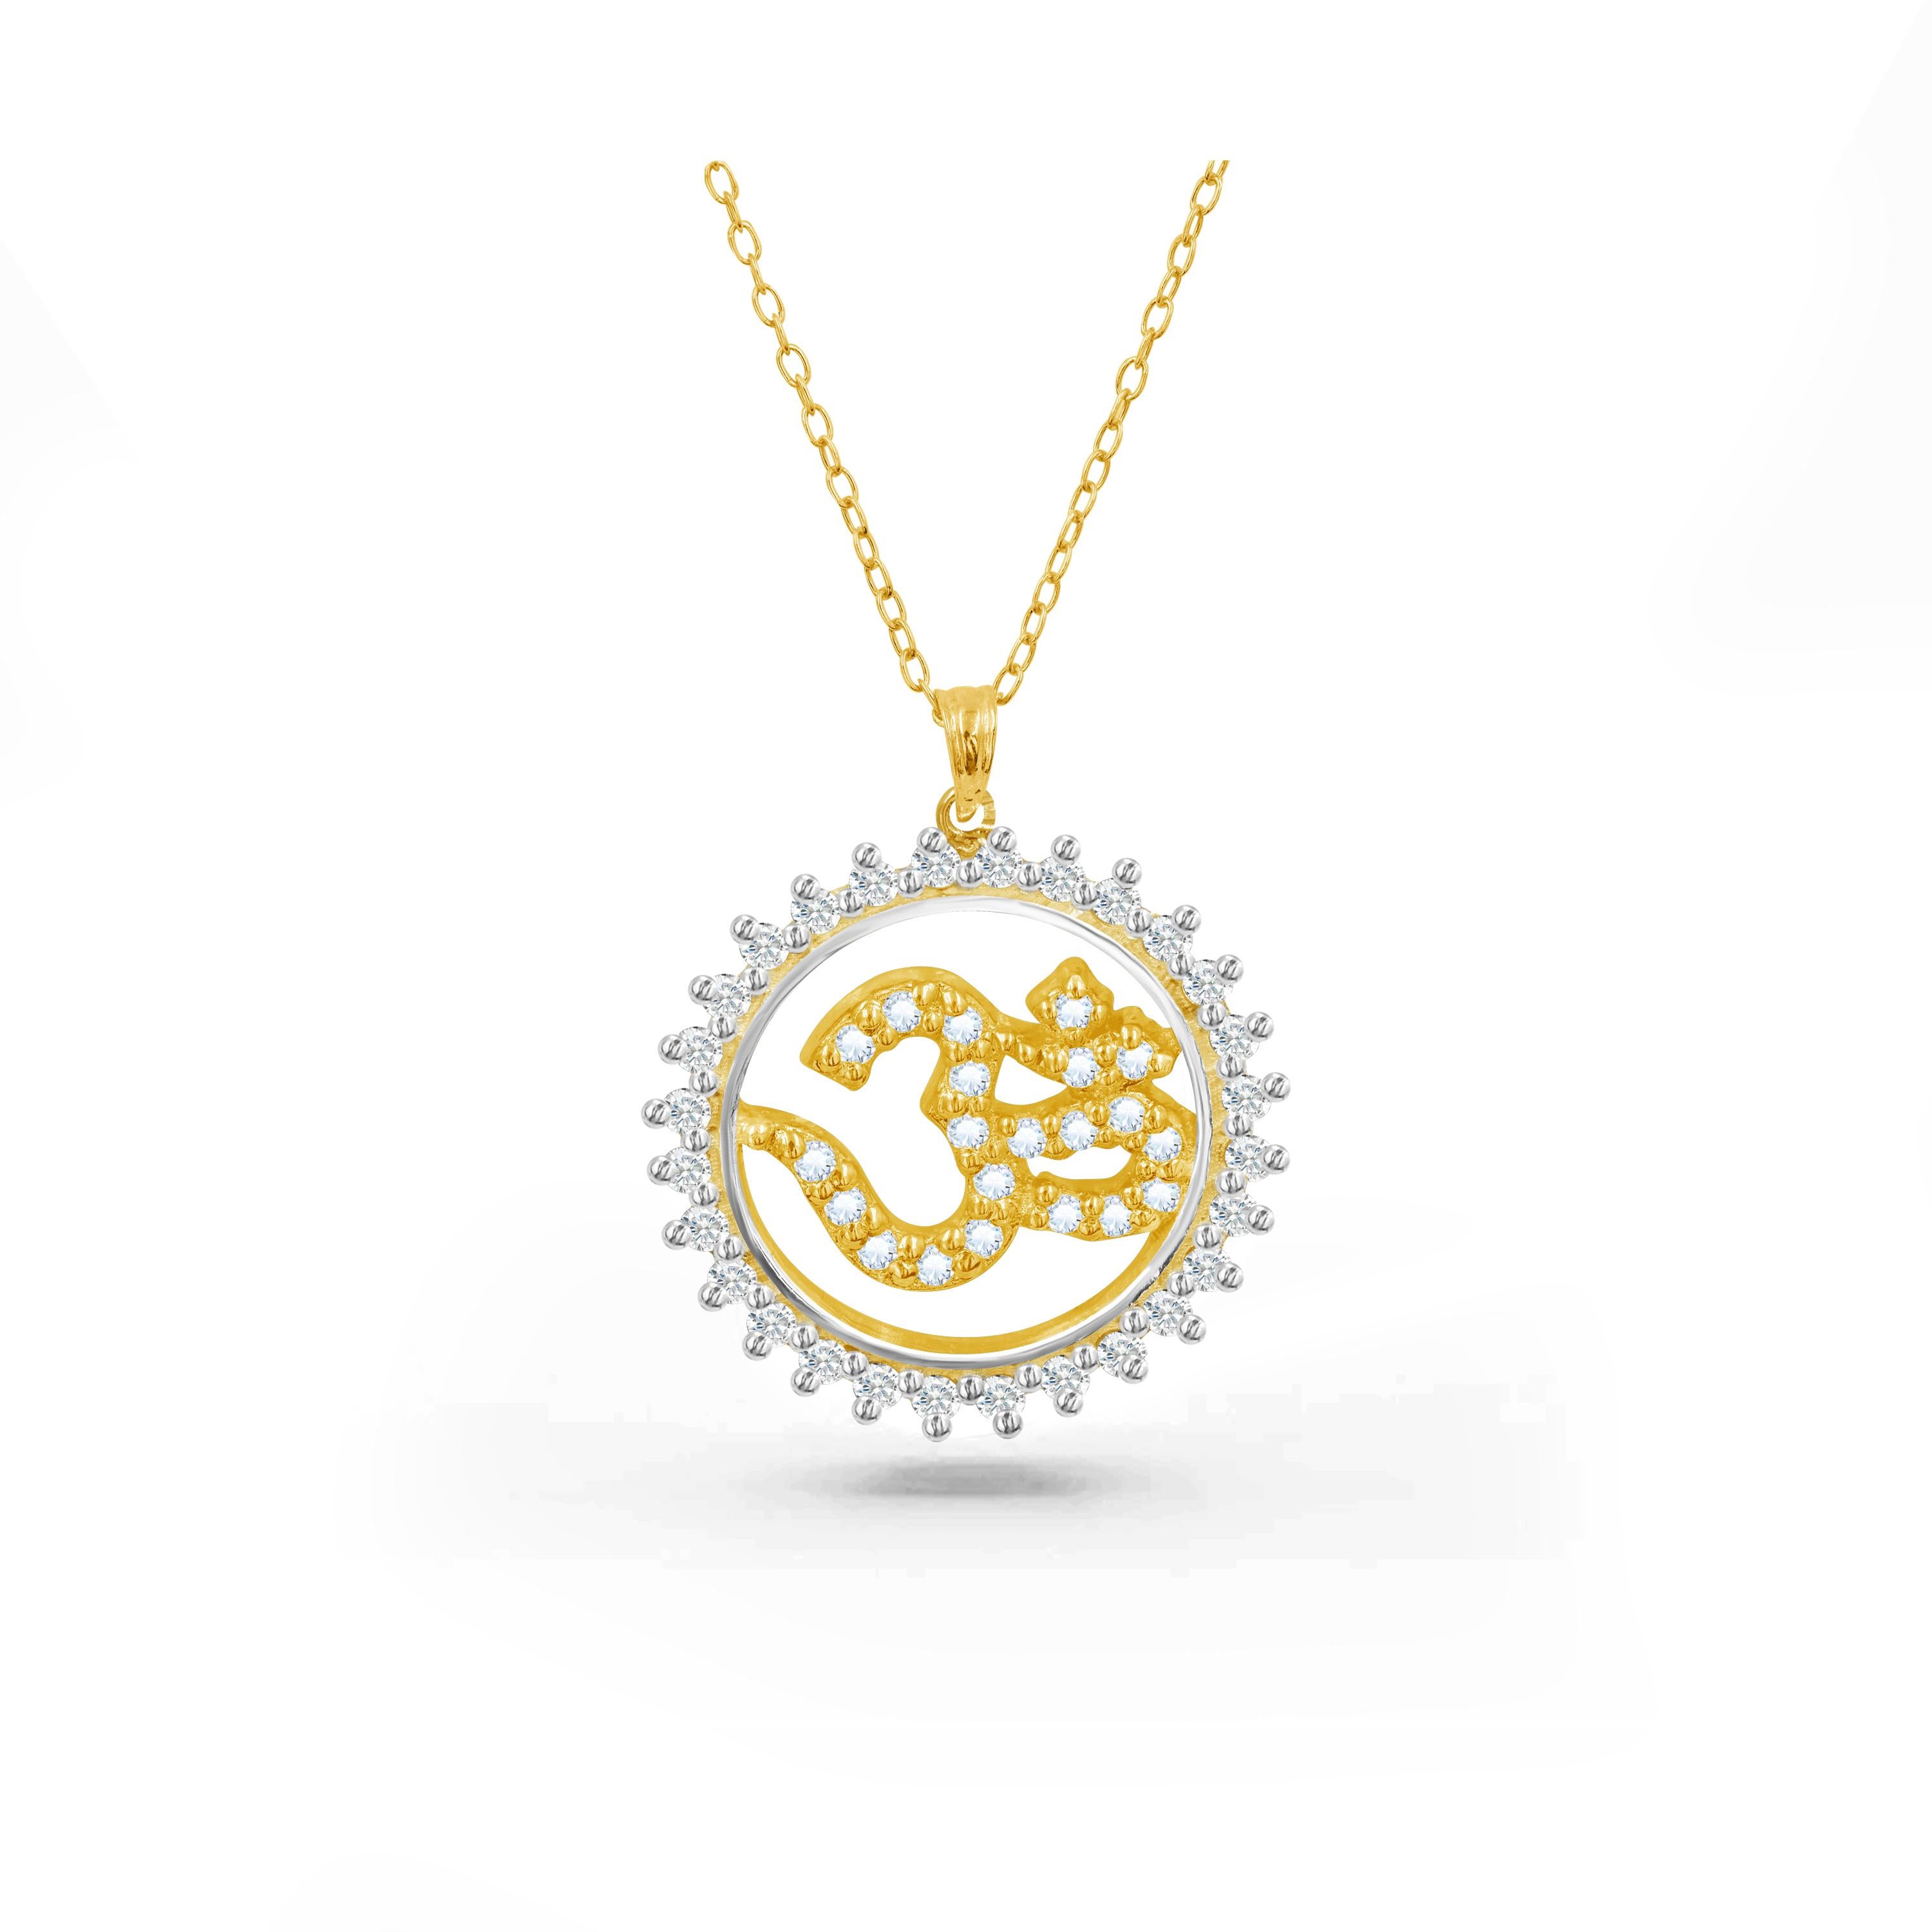 Handcrafted OM diamond necklace is a perfect everyday wear necklace to bring inner peace and spirituality. This beautiful Hindu religious OM necklace is surrounded with lotus leaf petals which makes it a statement piece. This Hindu necklace can be